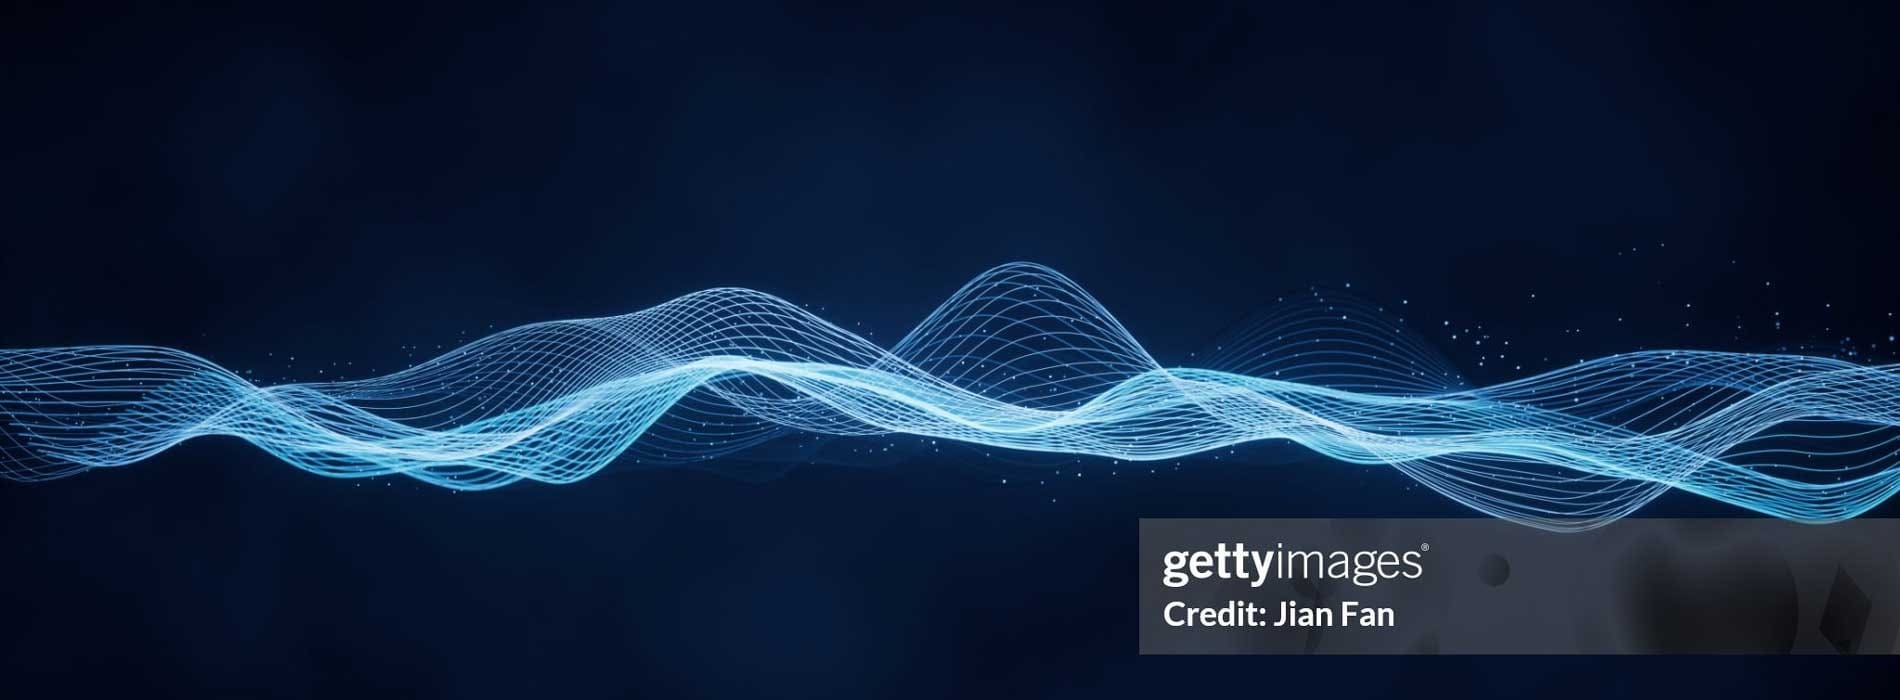 Dynamic blue wave patterns represent the flow of information and innovation in technology.